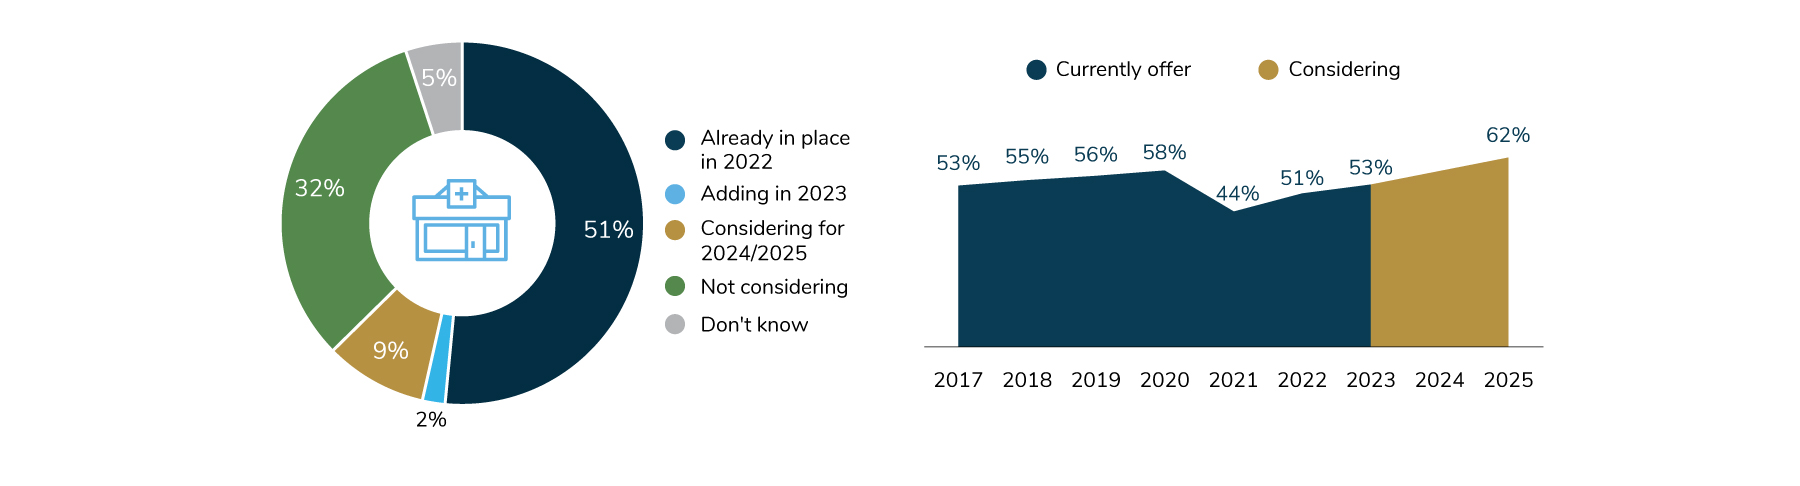 After dropping from 58% in 2020 to 44% in 2021, 53% of large employers will offer at least one on-site/near-site clinics to their employees. By 2025, it could be as high as 62%.